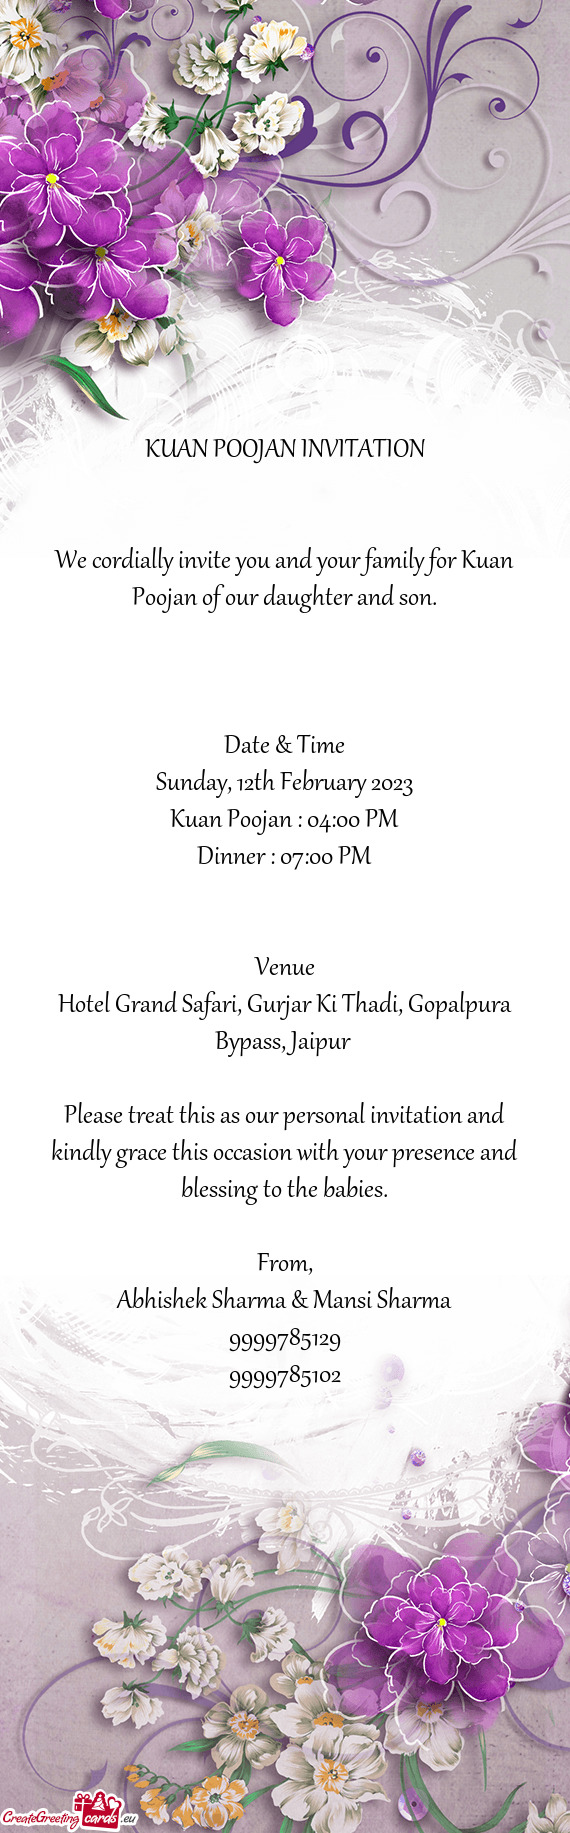 We cordially invite you and your family for Kuan Poojan of our daughter and son